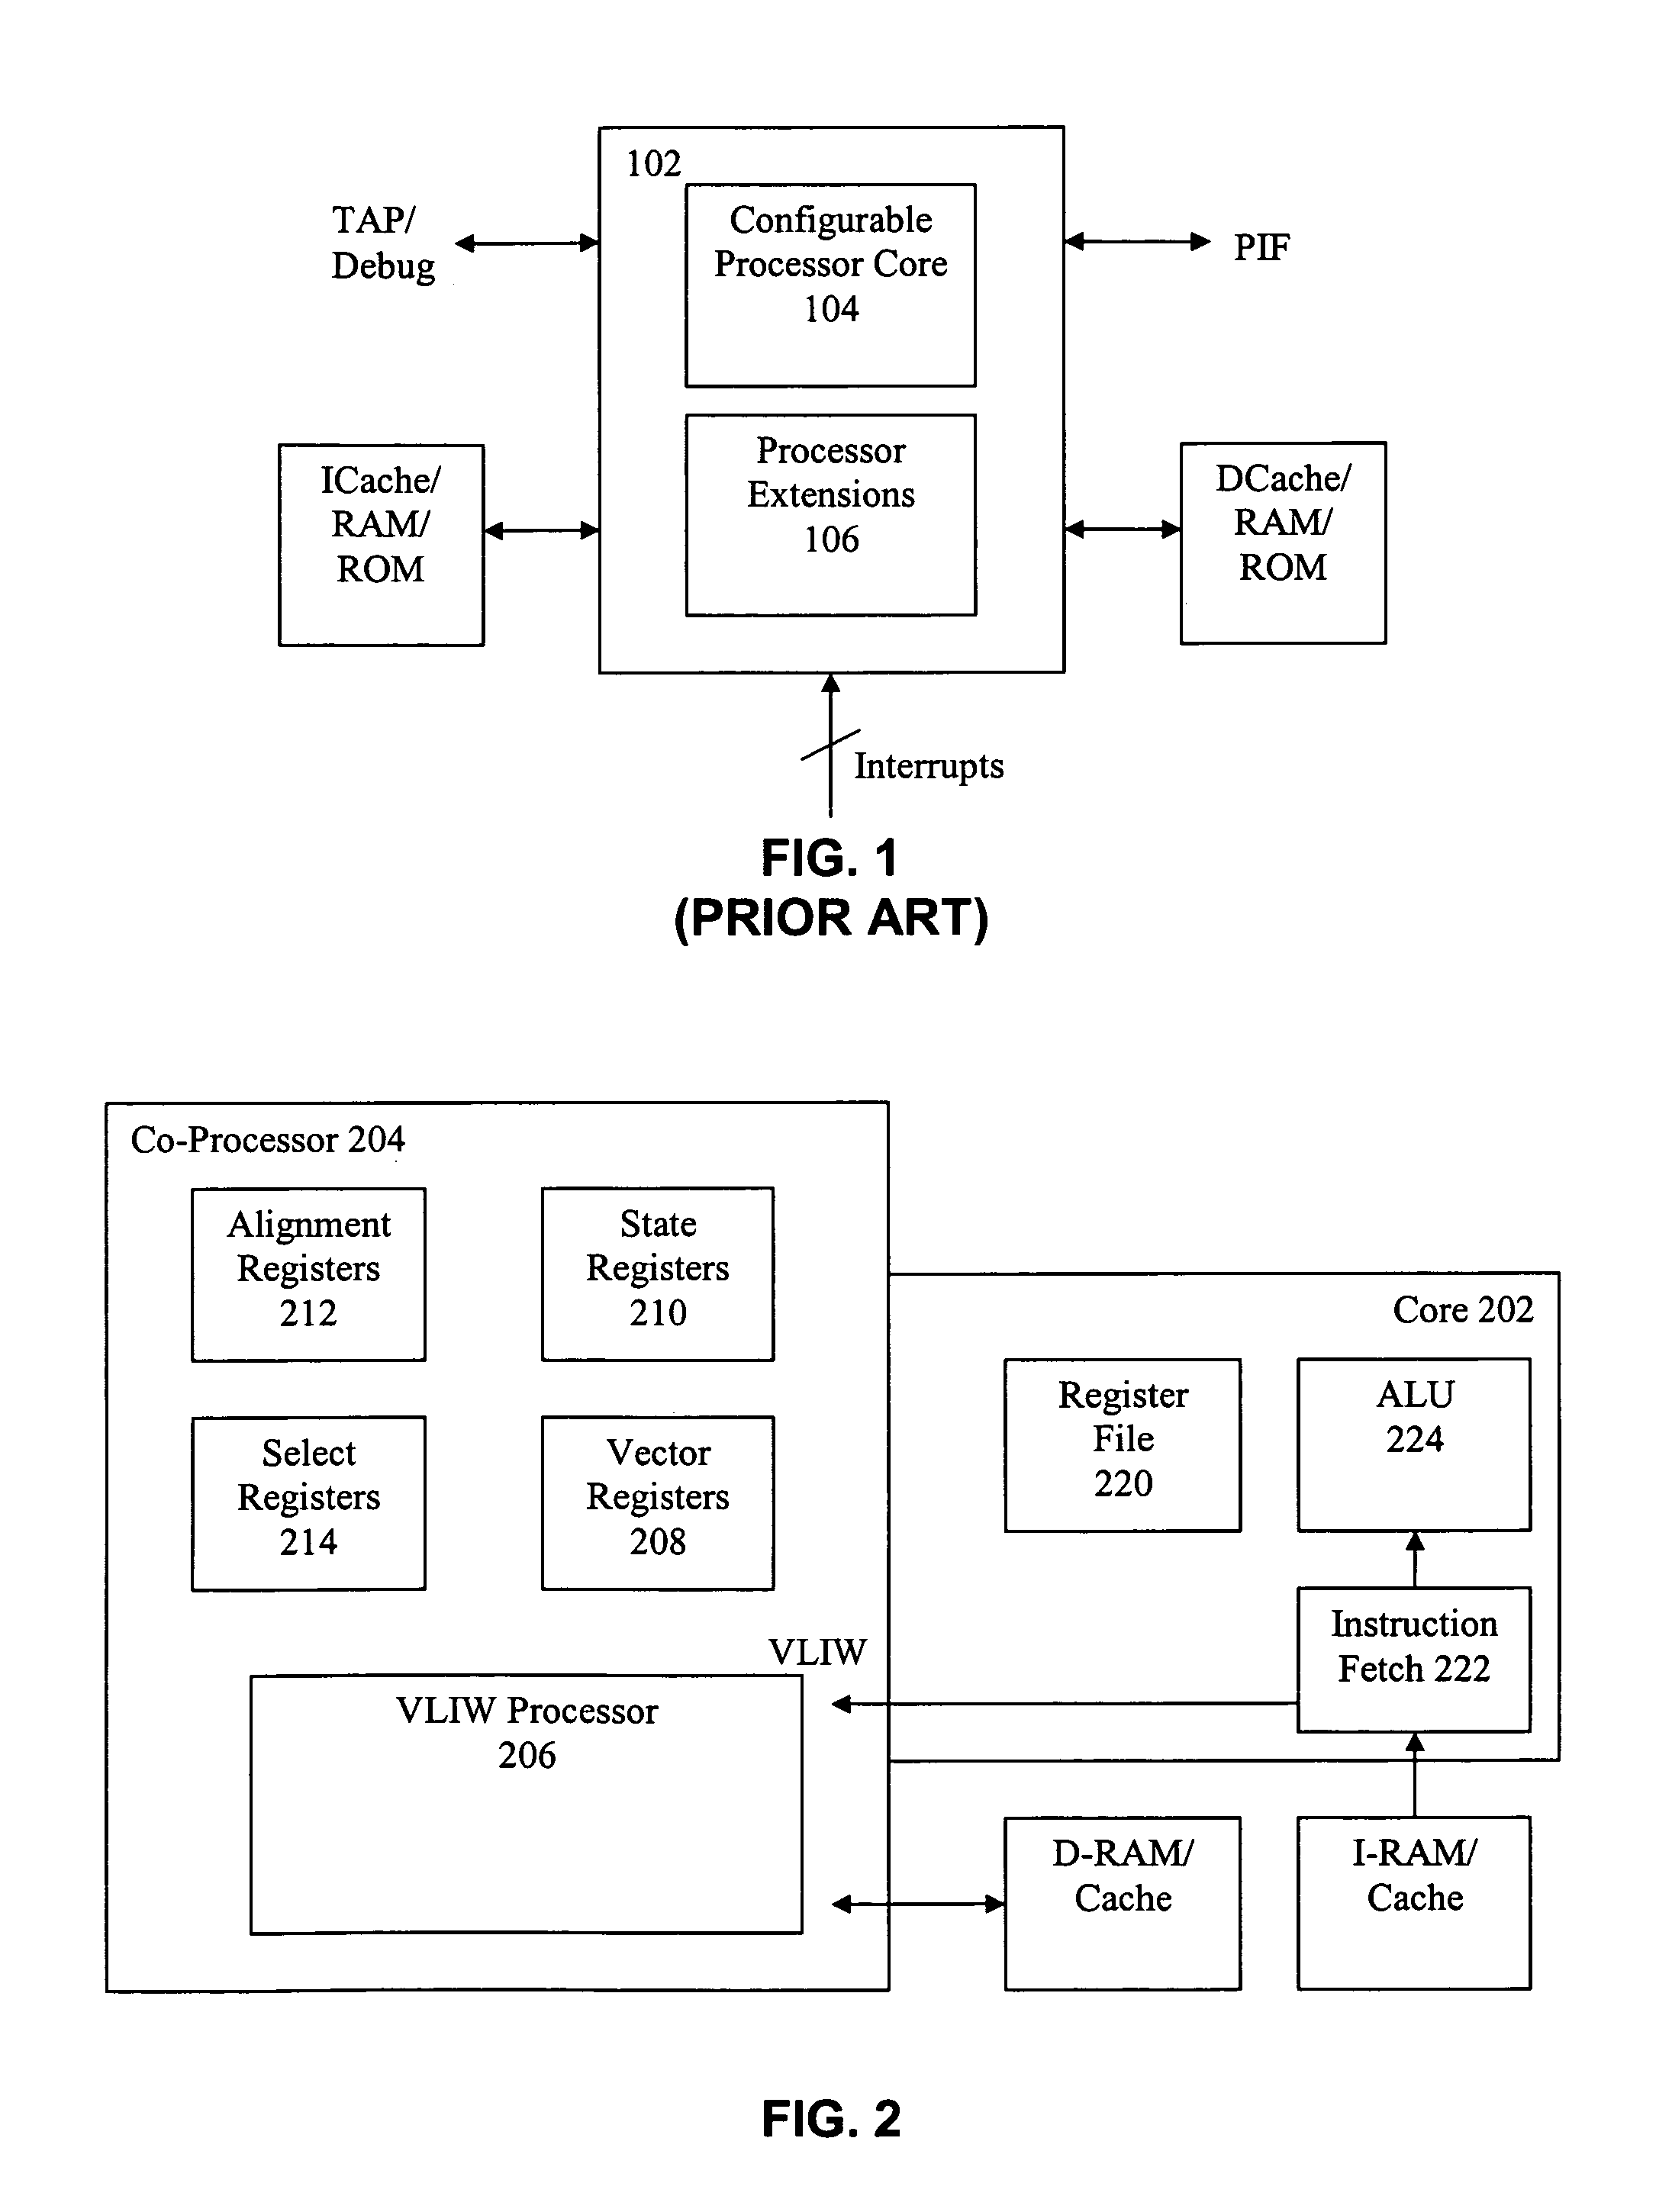 Load/store operation of memory misaligned vector data using alignment register storing realigned data portion for combining with remaining portion